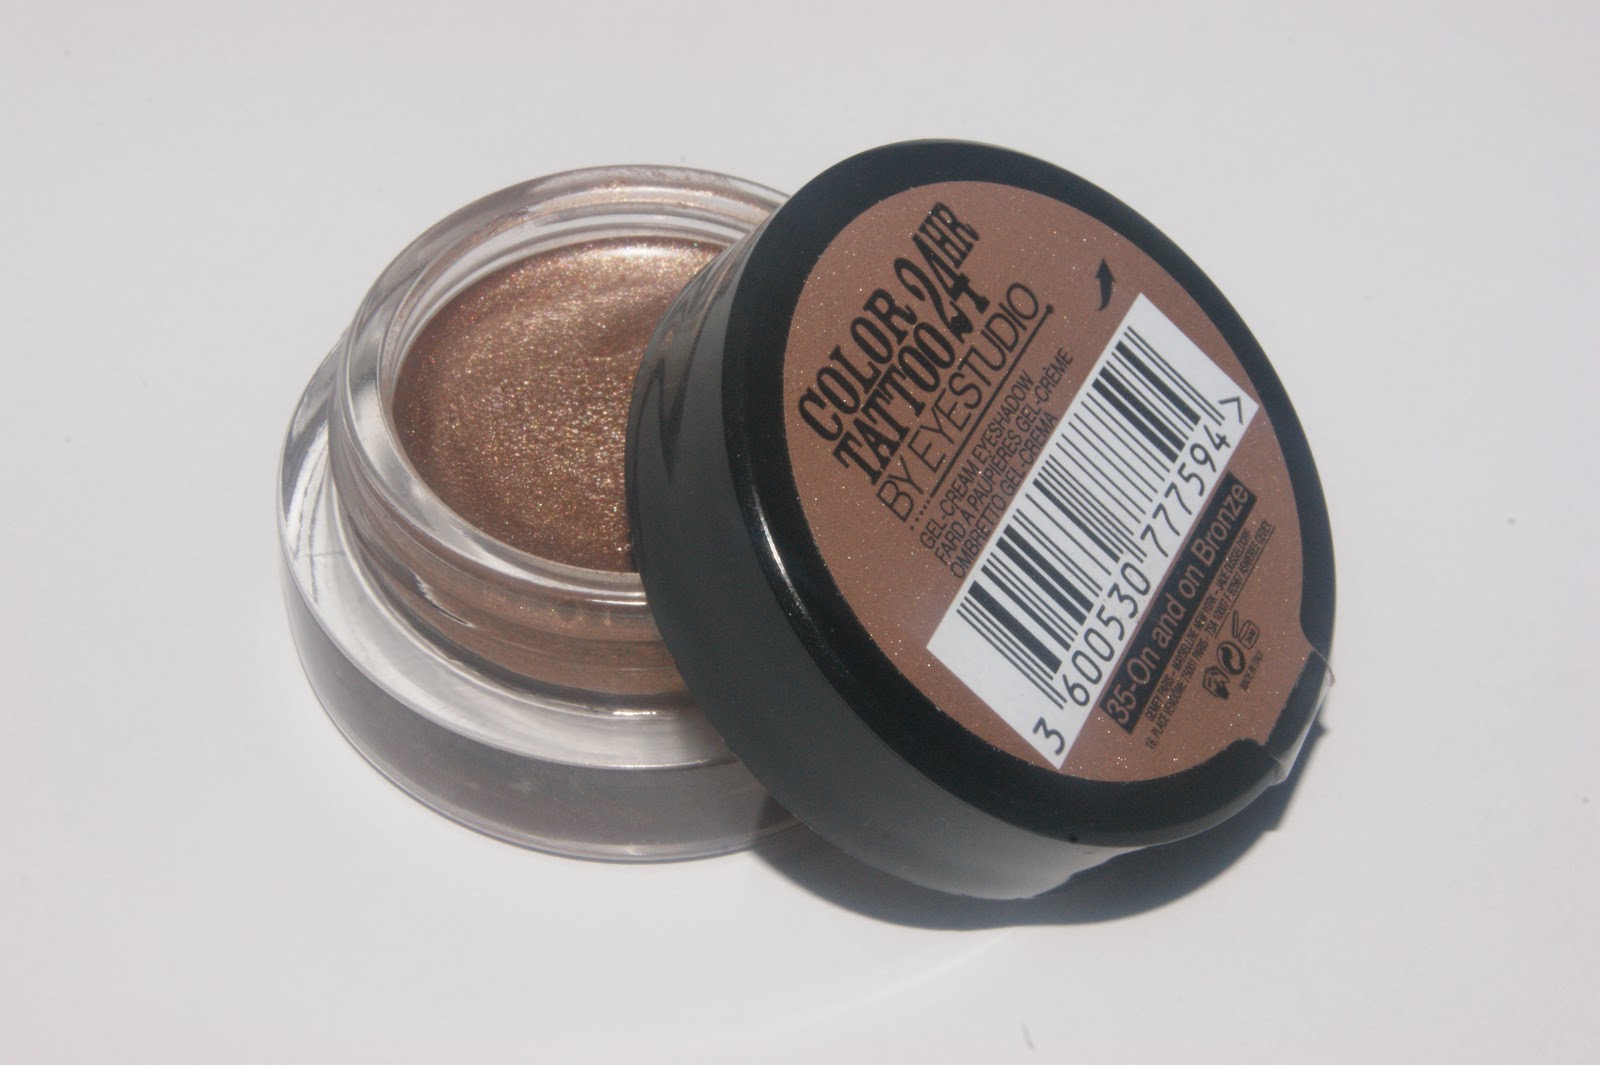 On On Sunday Eyeshadow | Color Tattoo and - Girl Review The Bronze Maybelline in 24hr